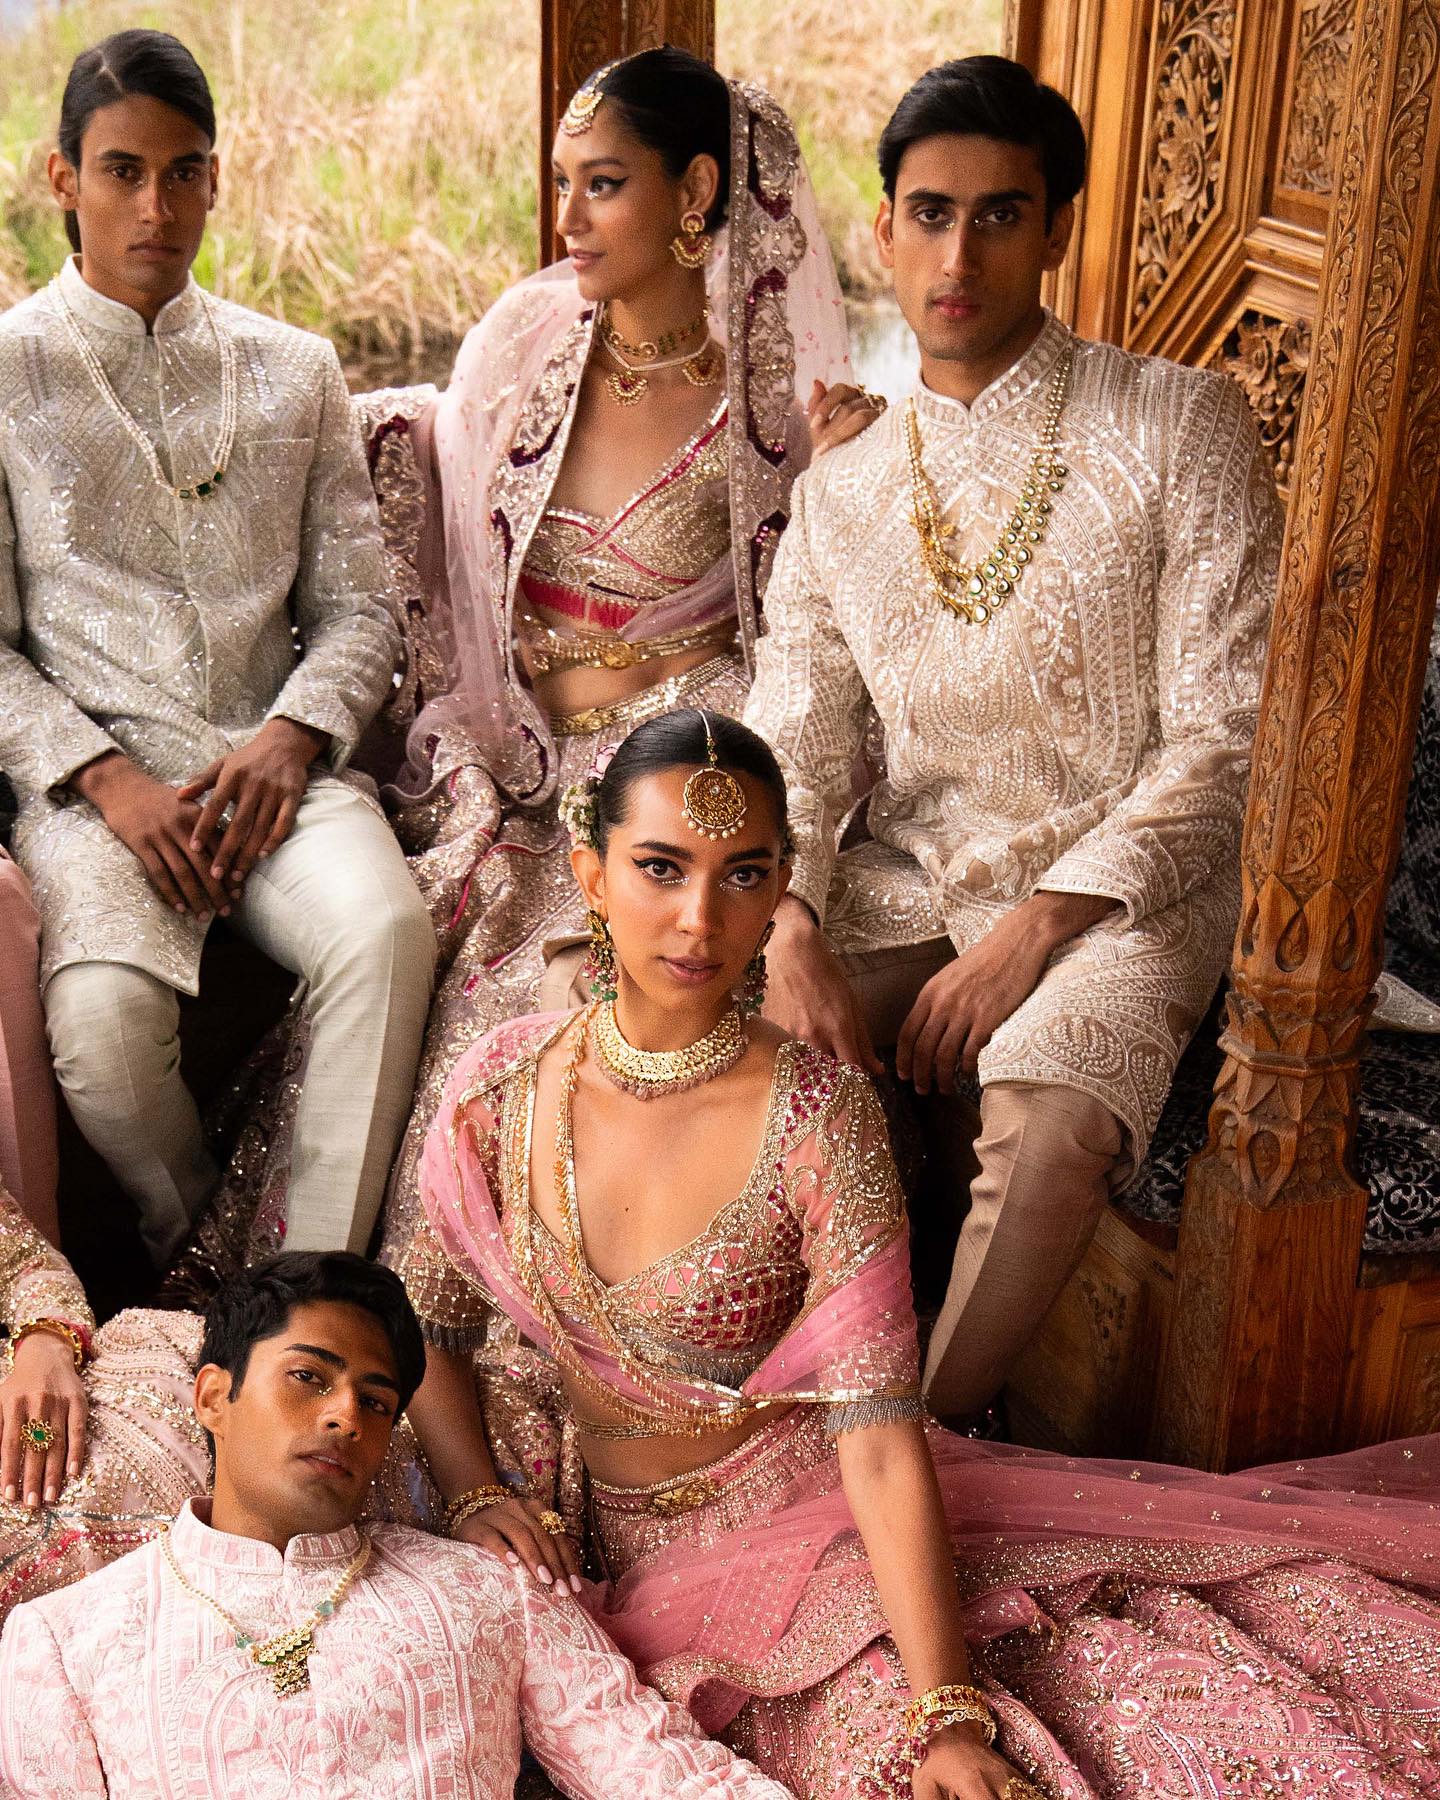 From Manish Malhotra To Masaba Gupta: See Which Designers Dropped Latest Wedding Collection!